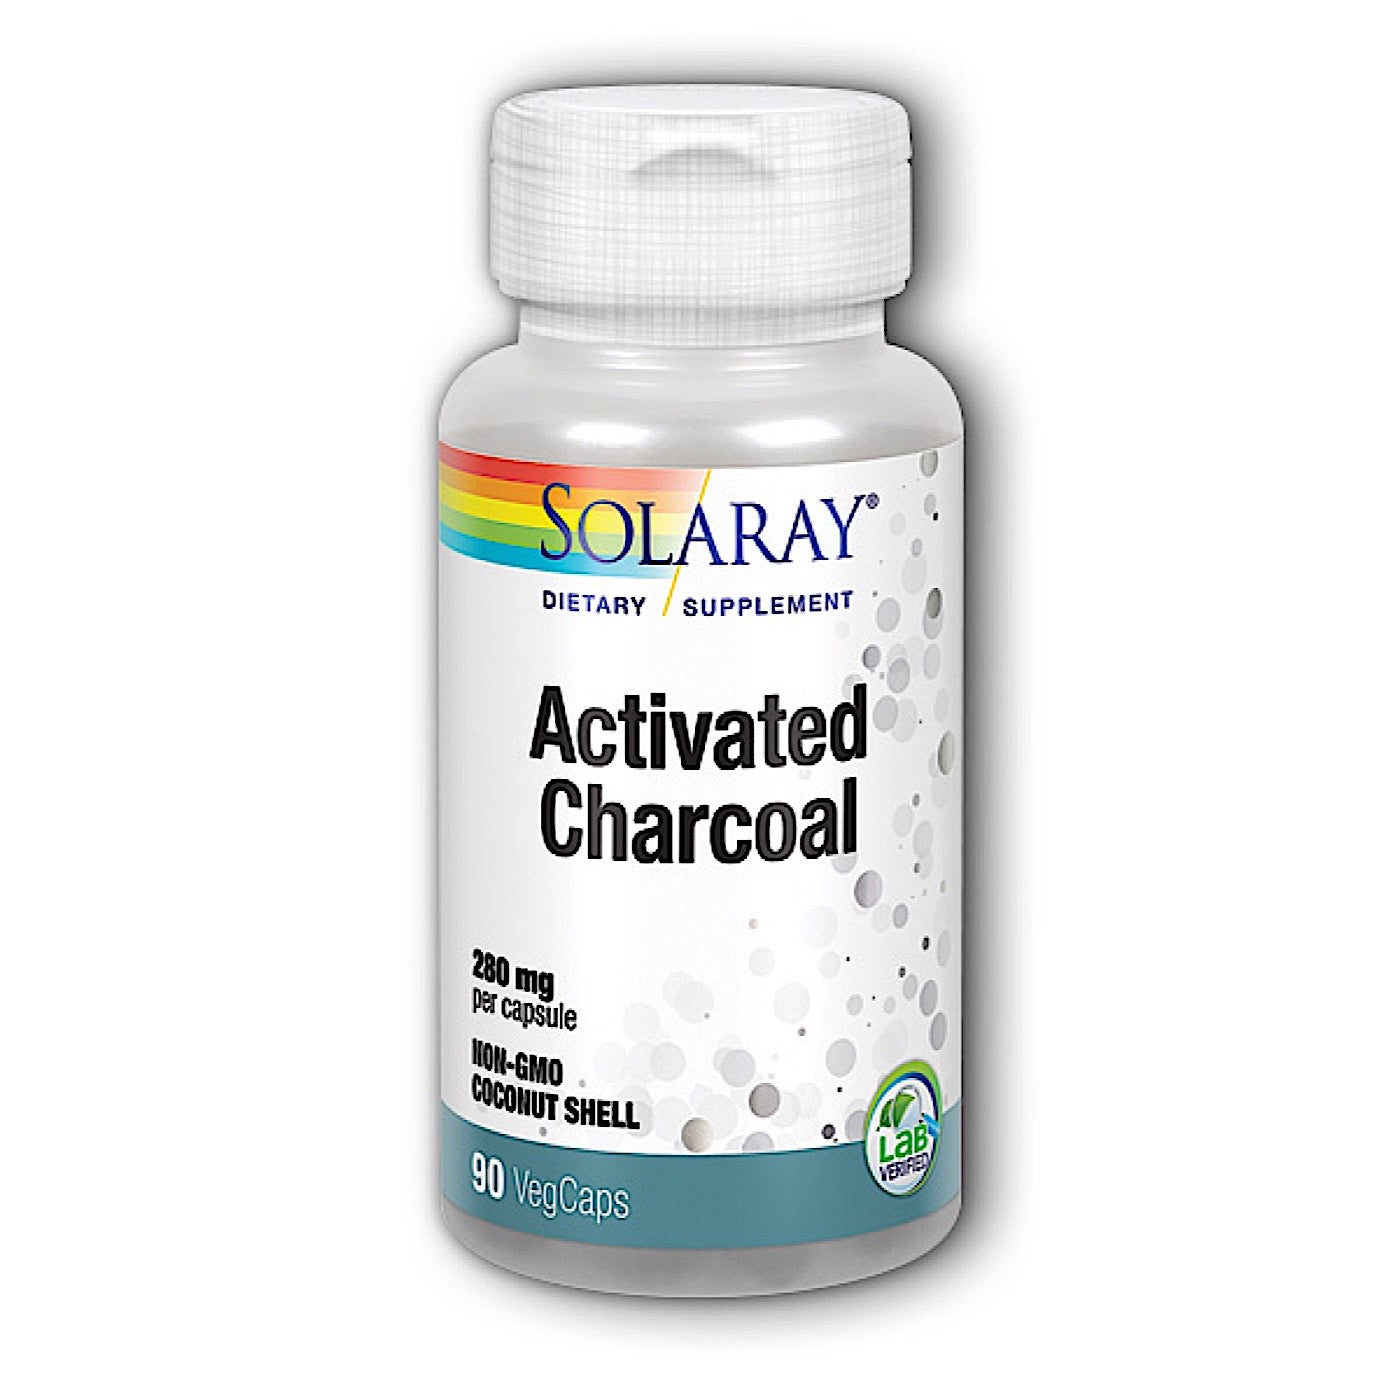 Solaray Activated Charcoal 280 Mg